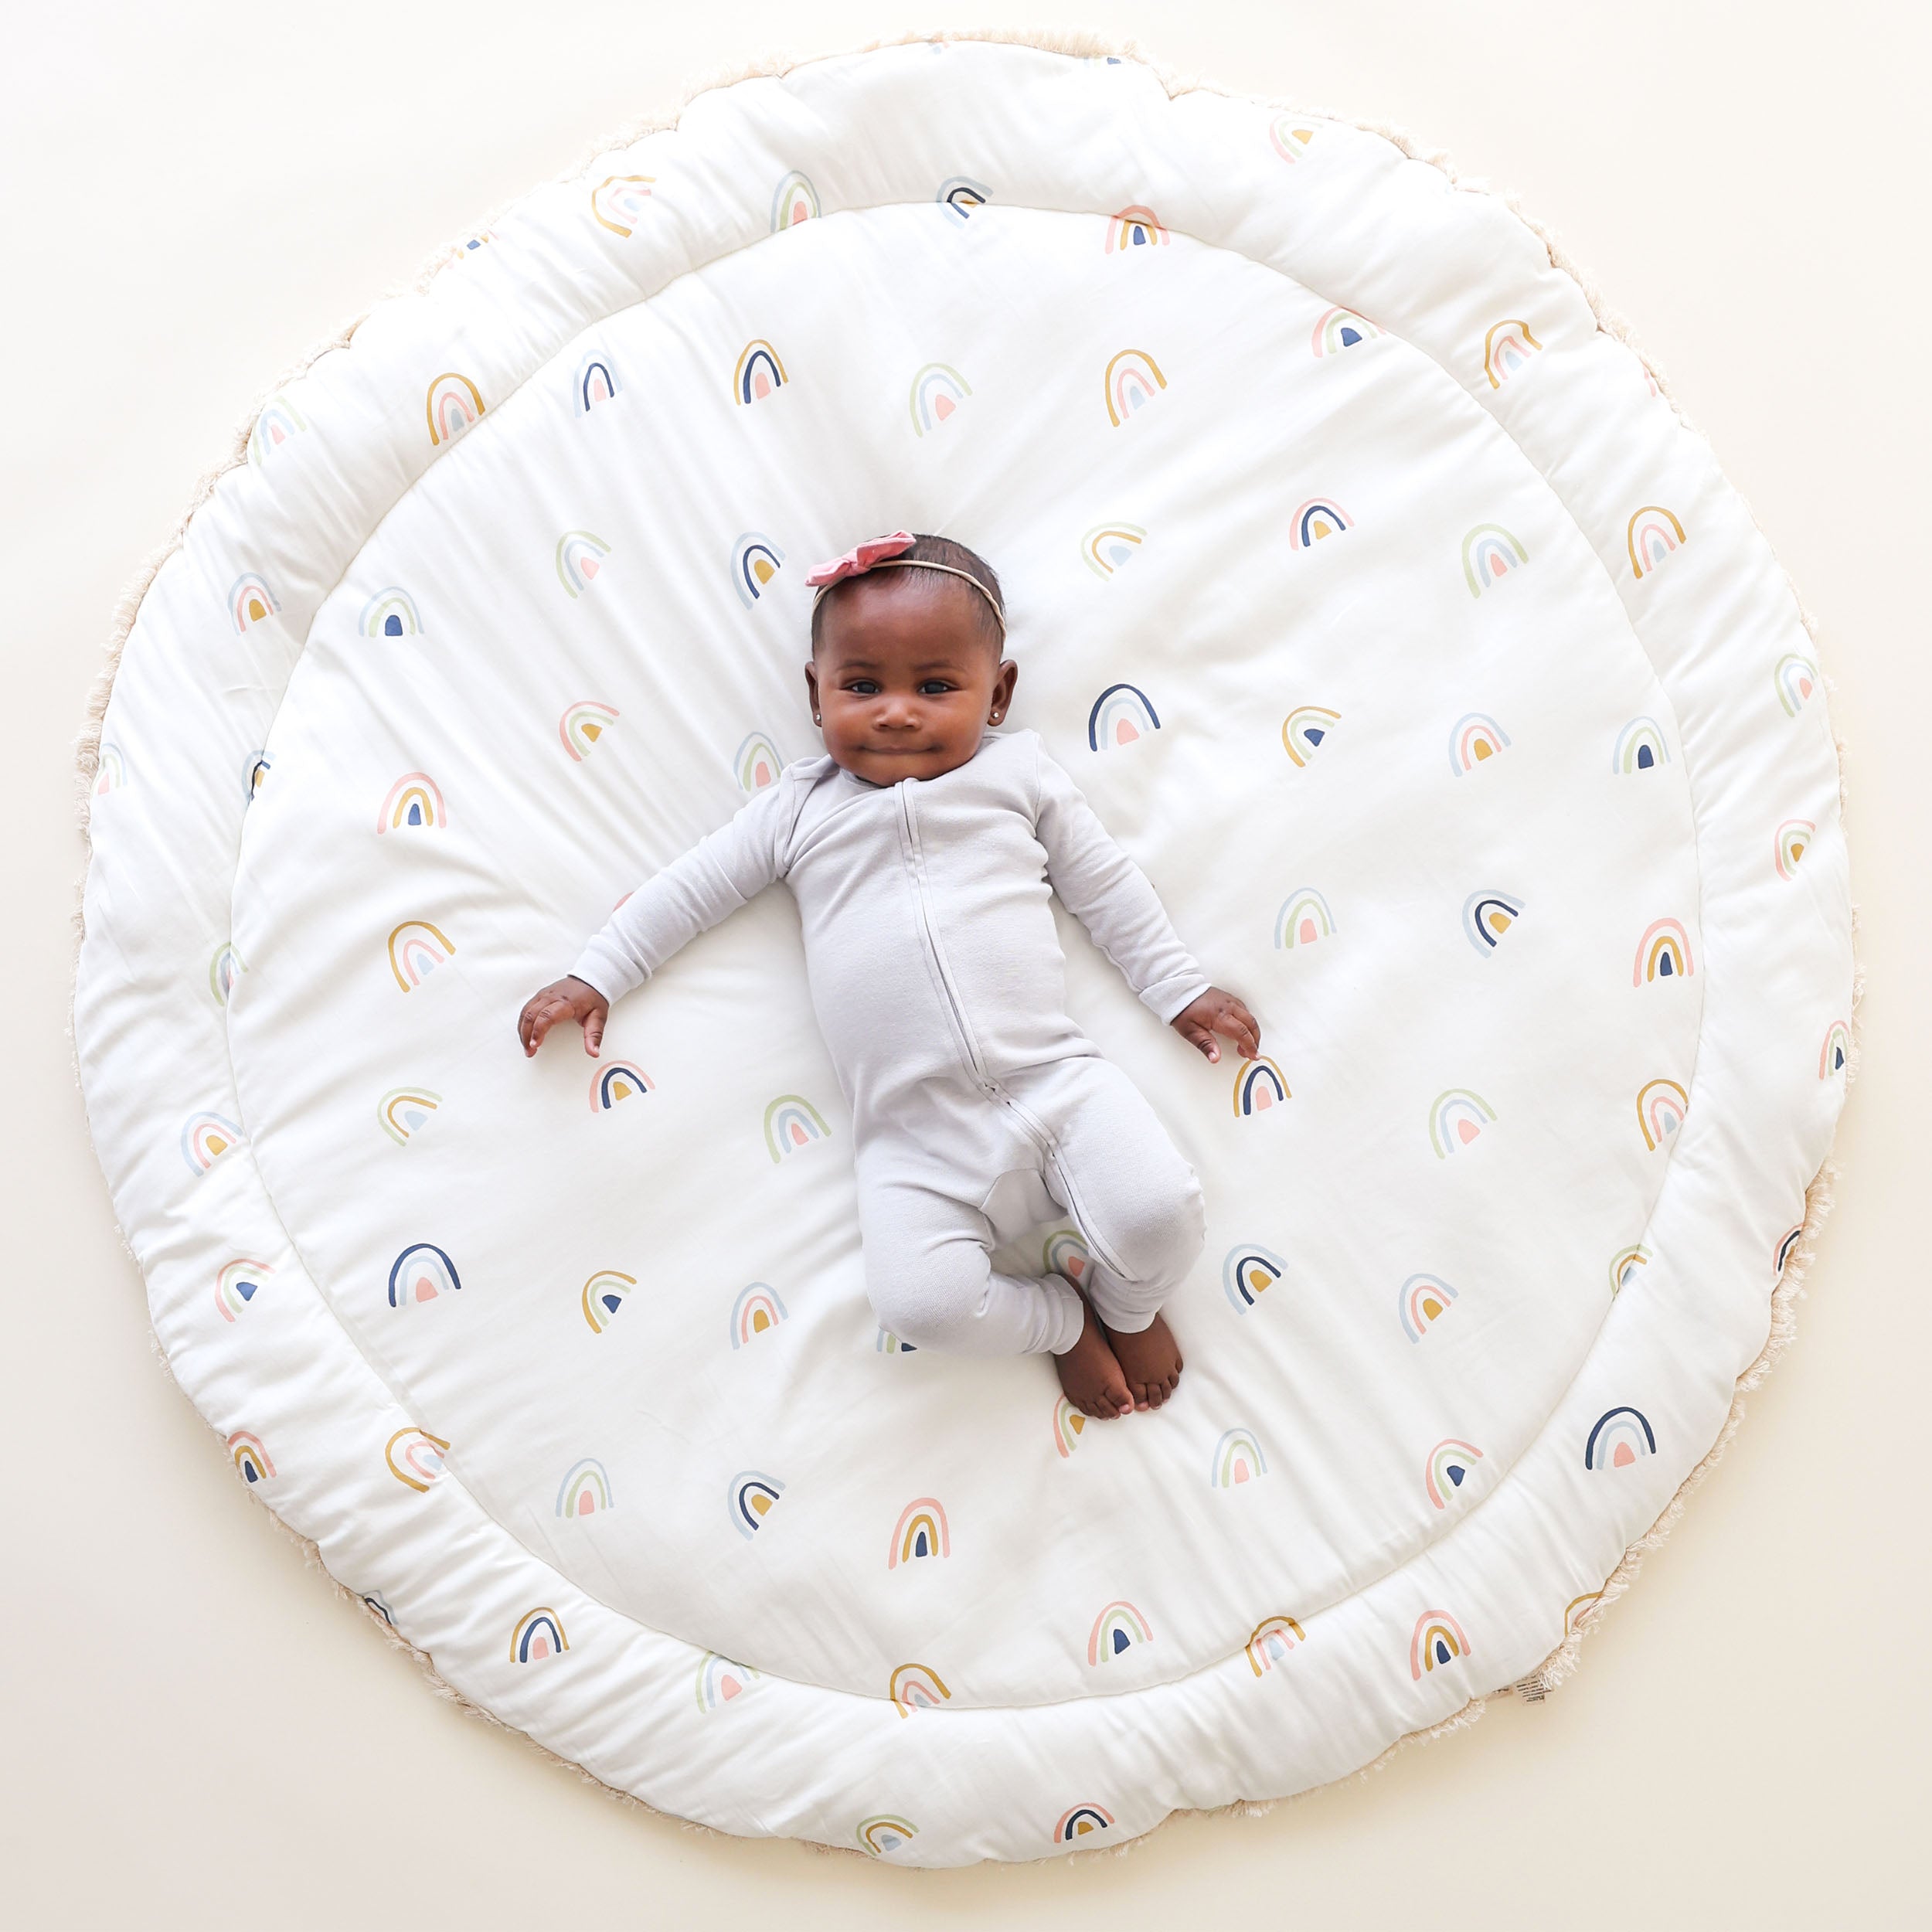 A cheerful baby with a red headband lies on a Makemake Organics Organic Cotton Quilted Reversible Play Mat adorned with colorful rainbows. The baby wears a white bodysuit and has a joyful expression.